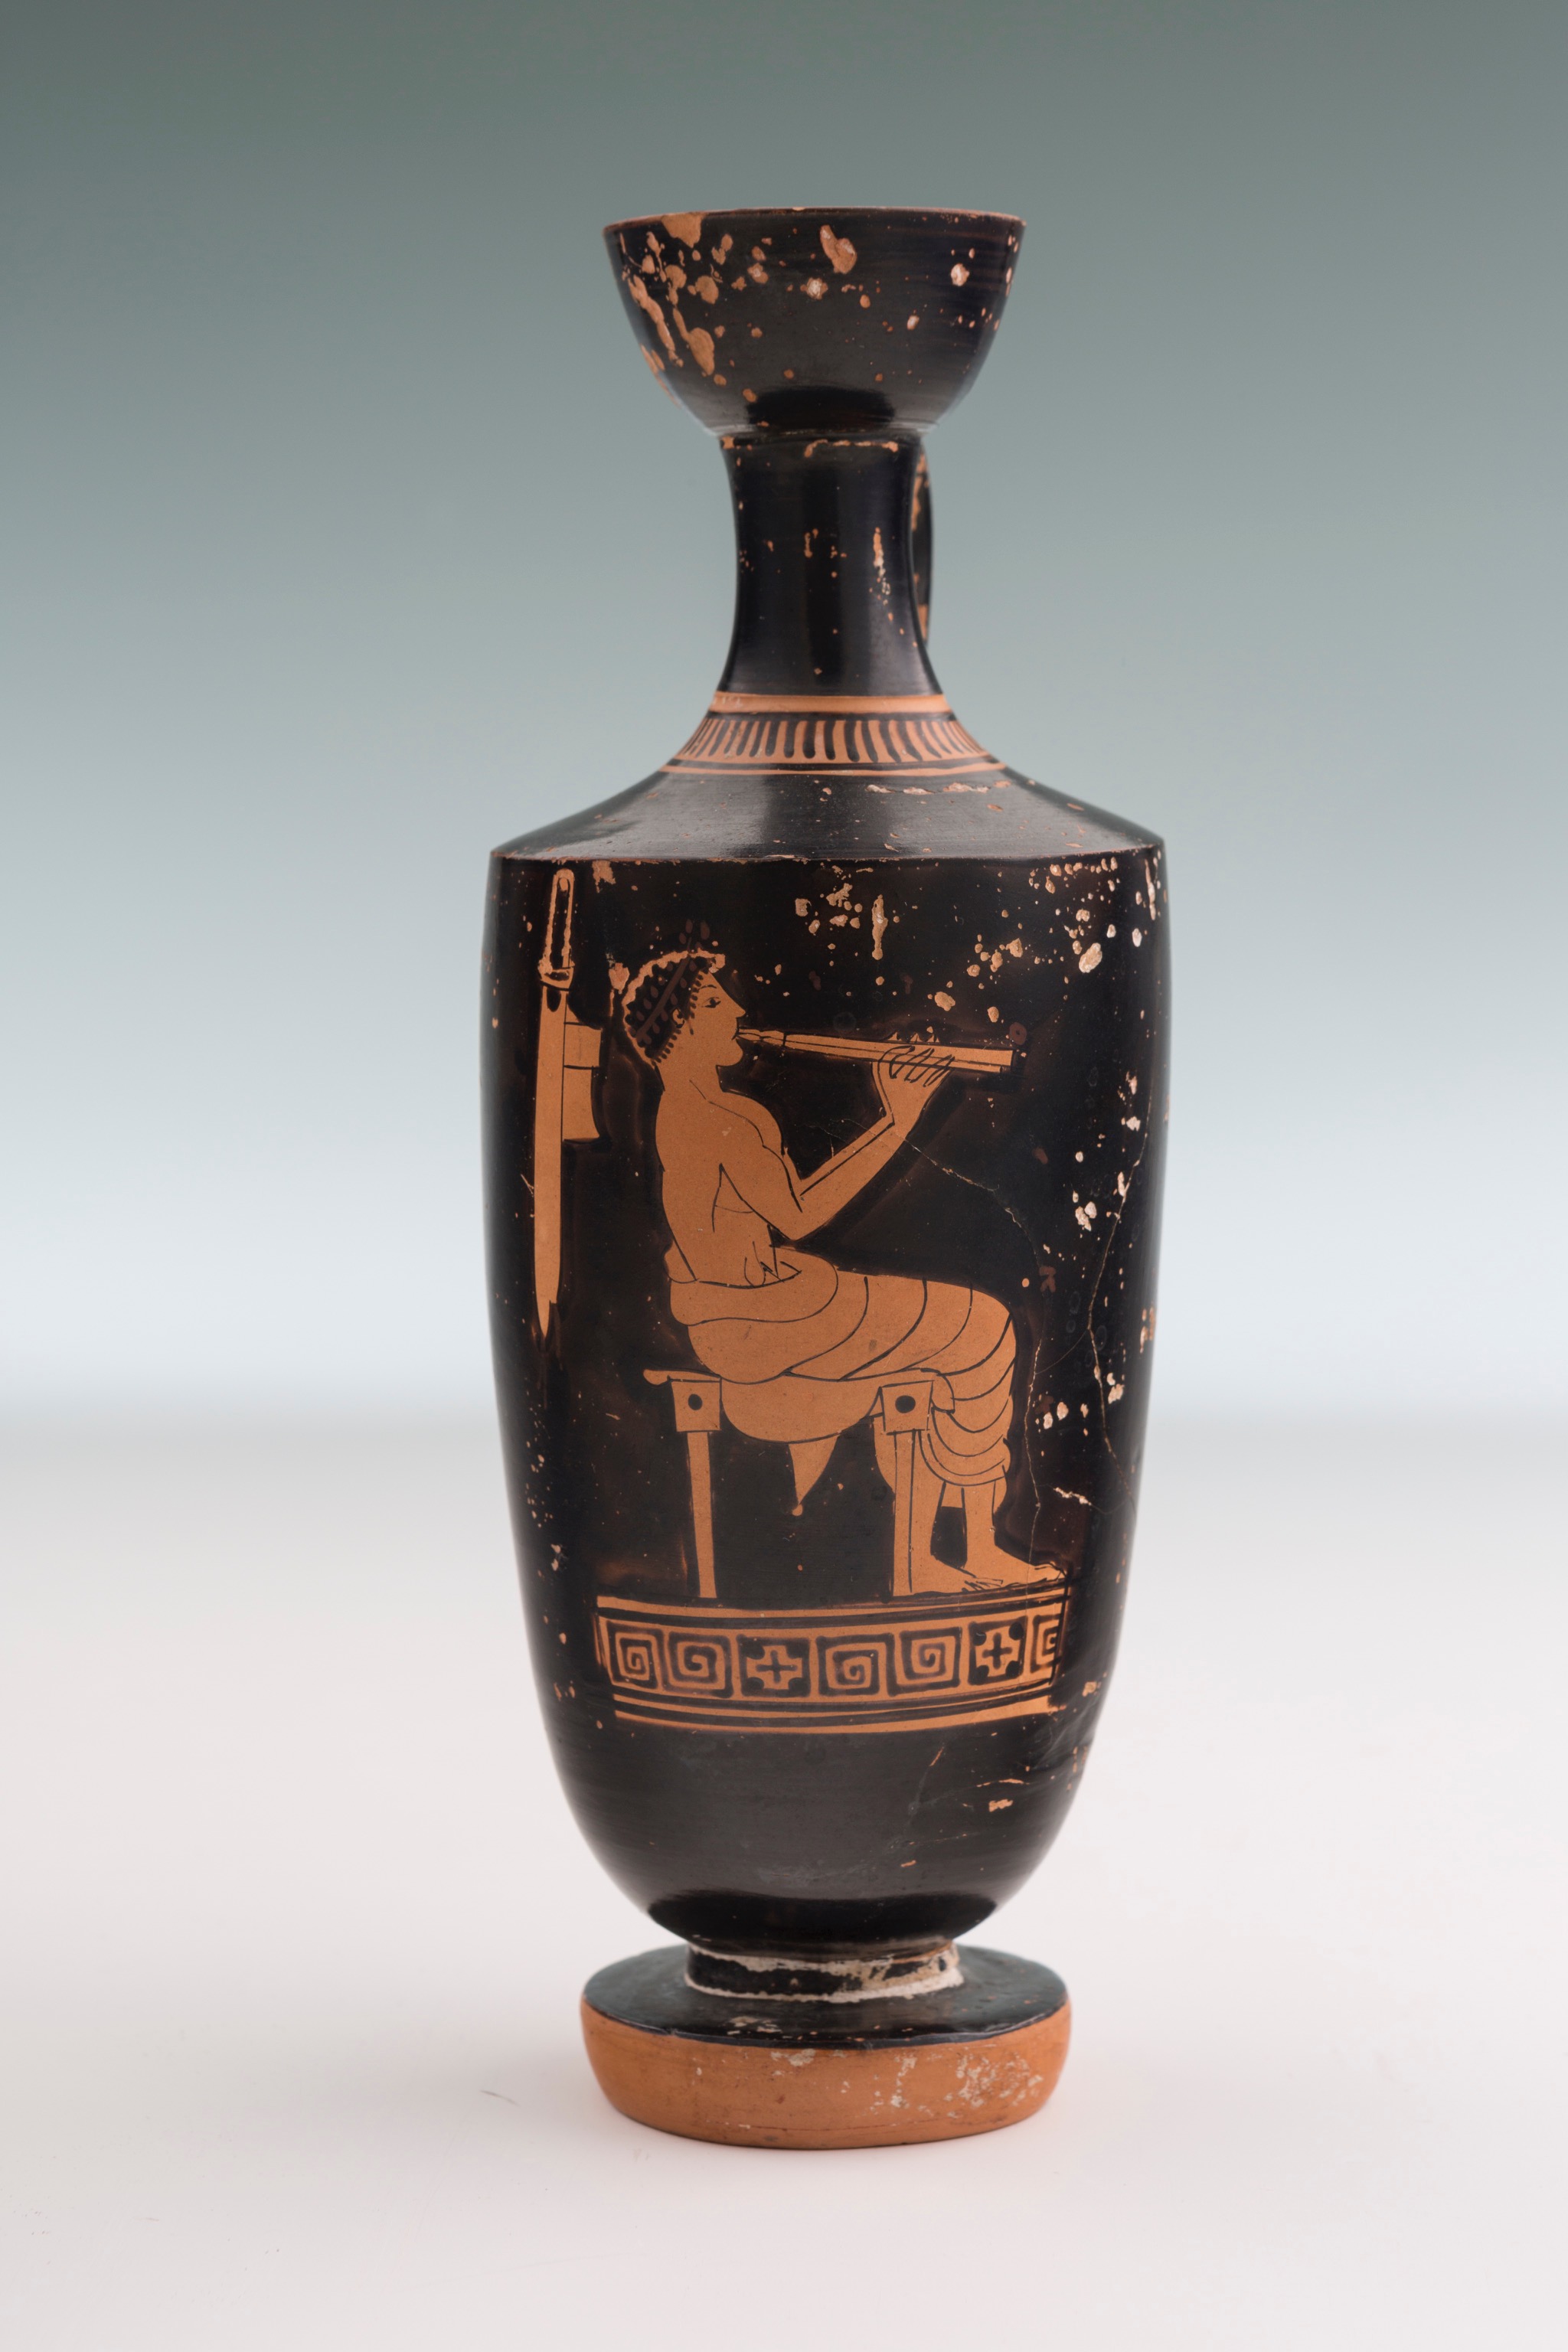 Red-Figure Lekythos with Flute-Player